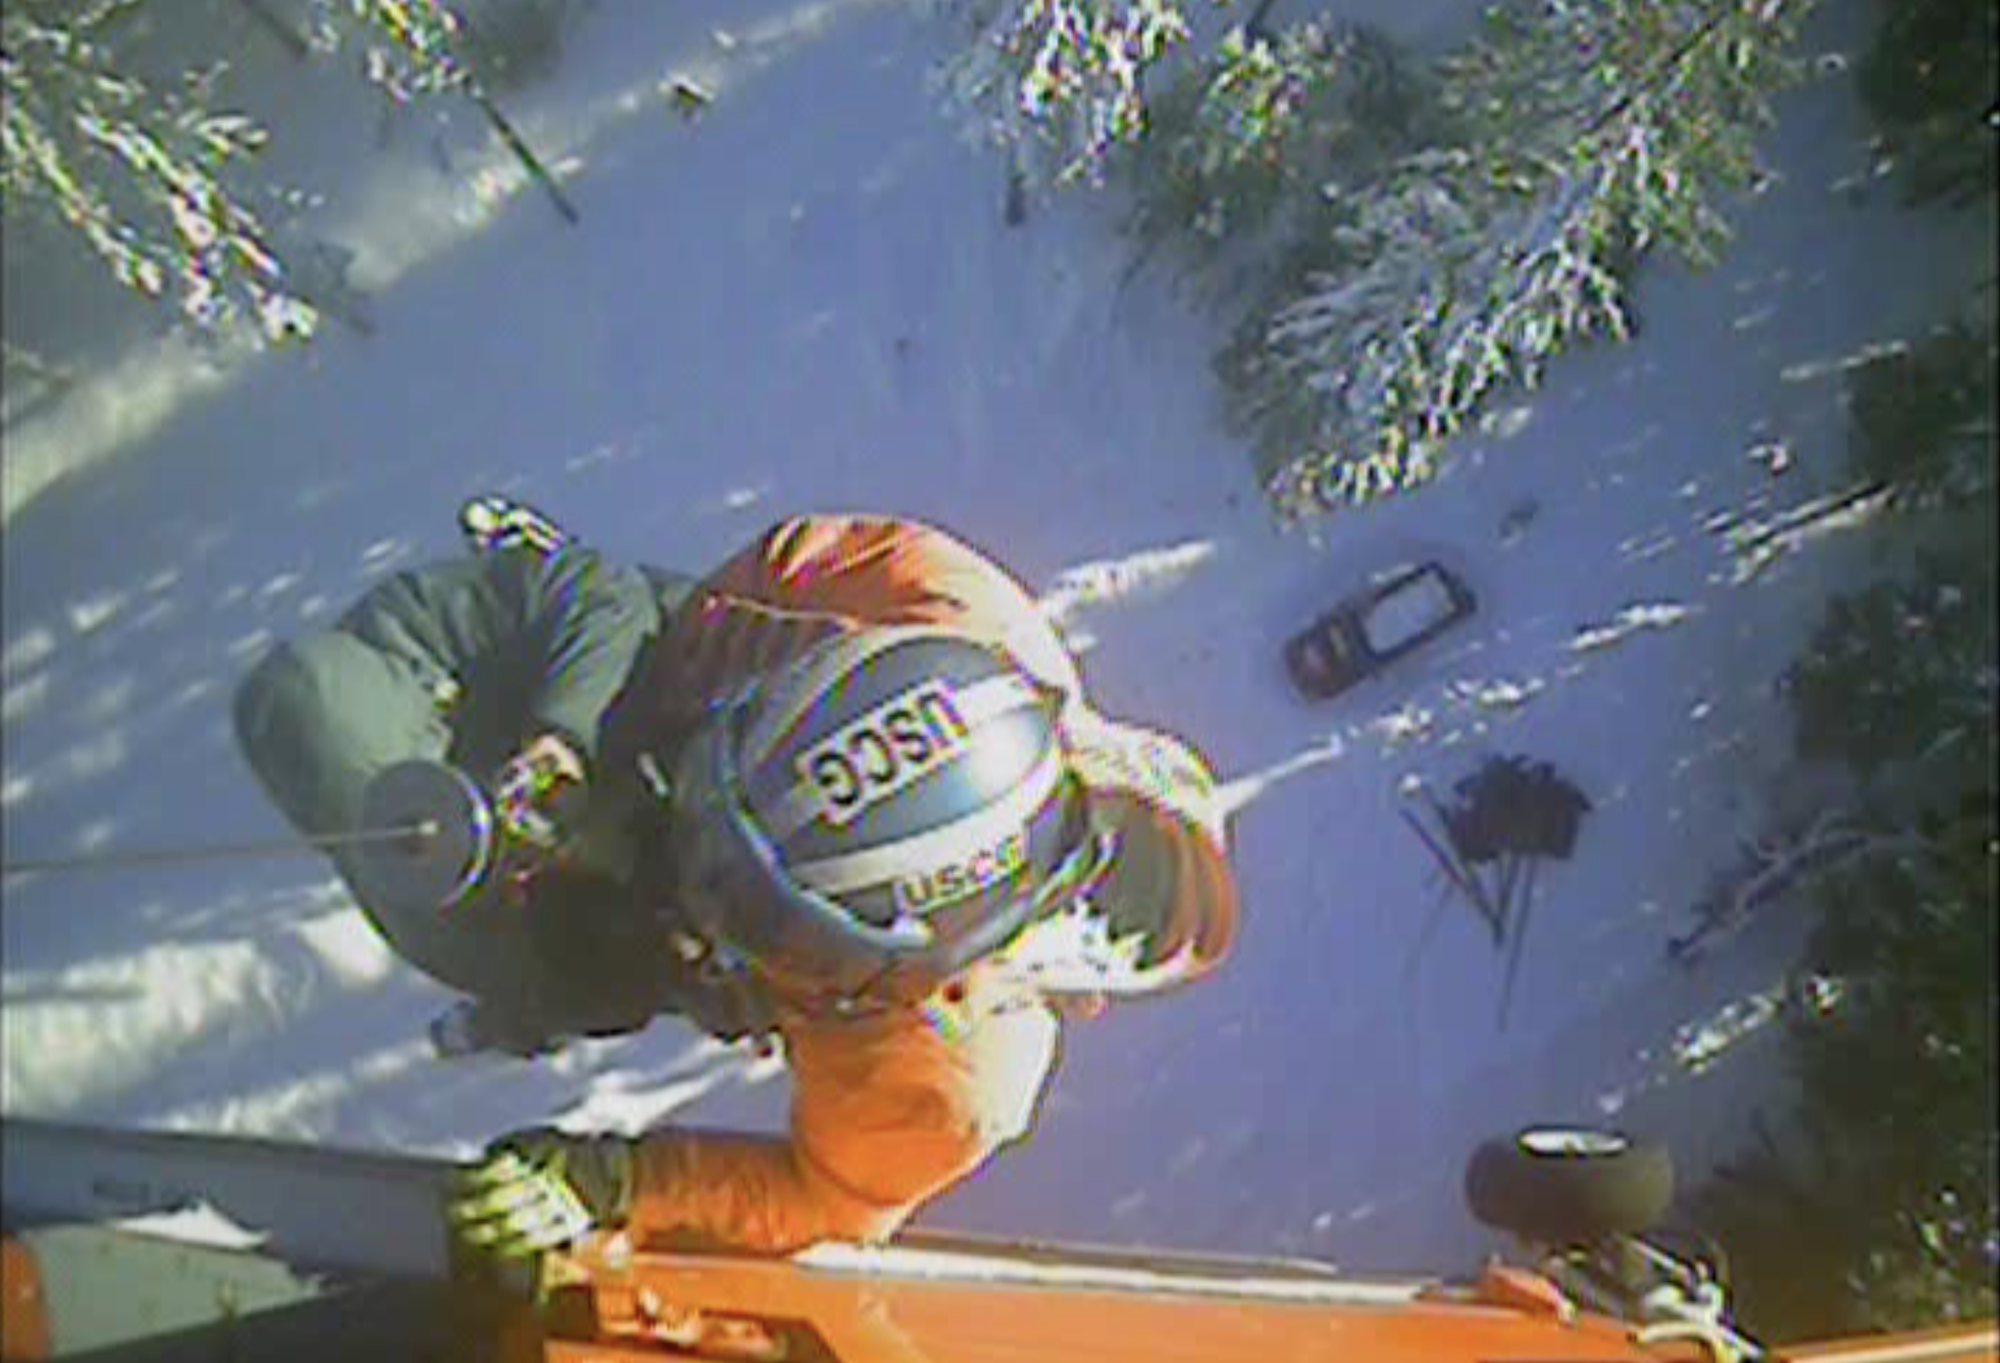 Coast Guard Sector North Bend MH-65 aircrew hoists 2 hikers near Eugene, OR